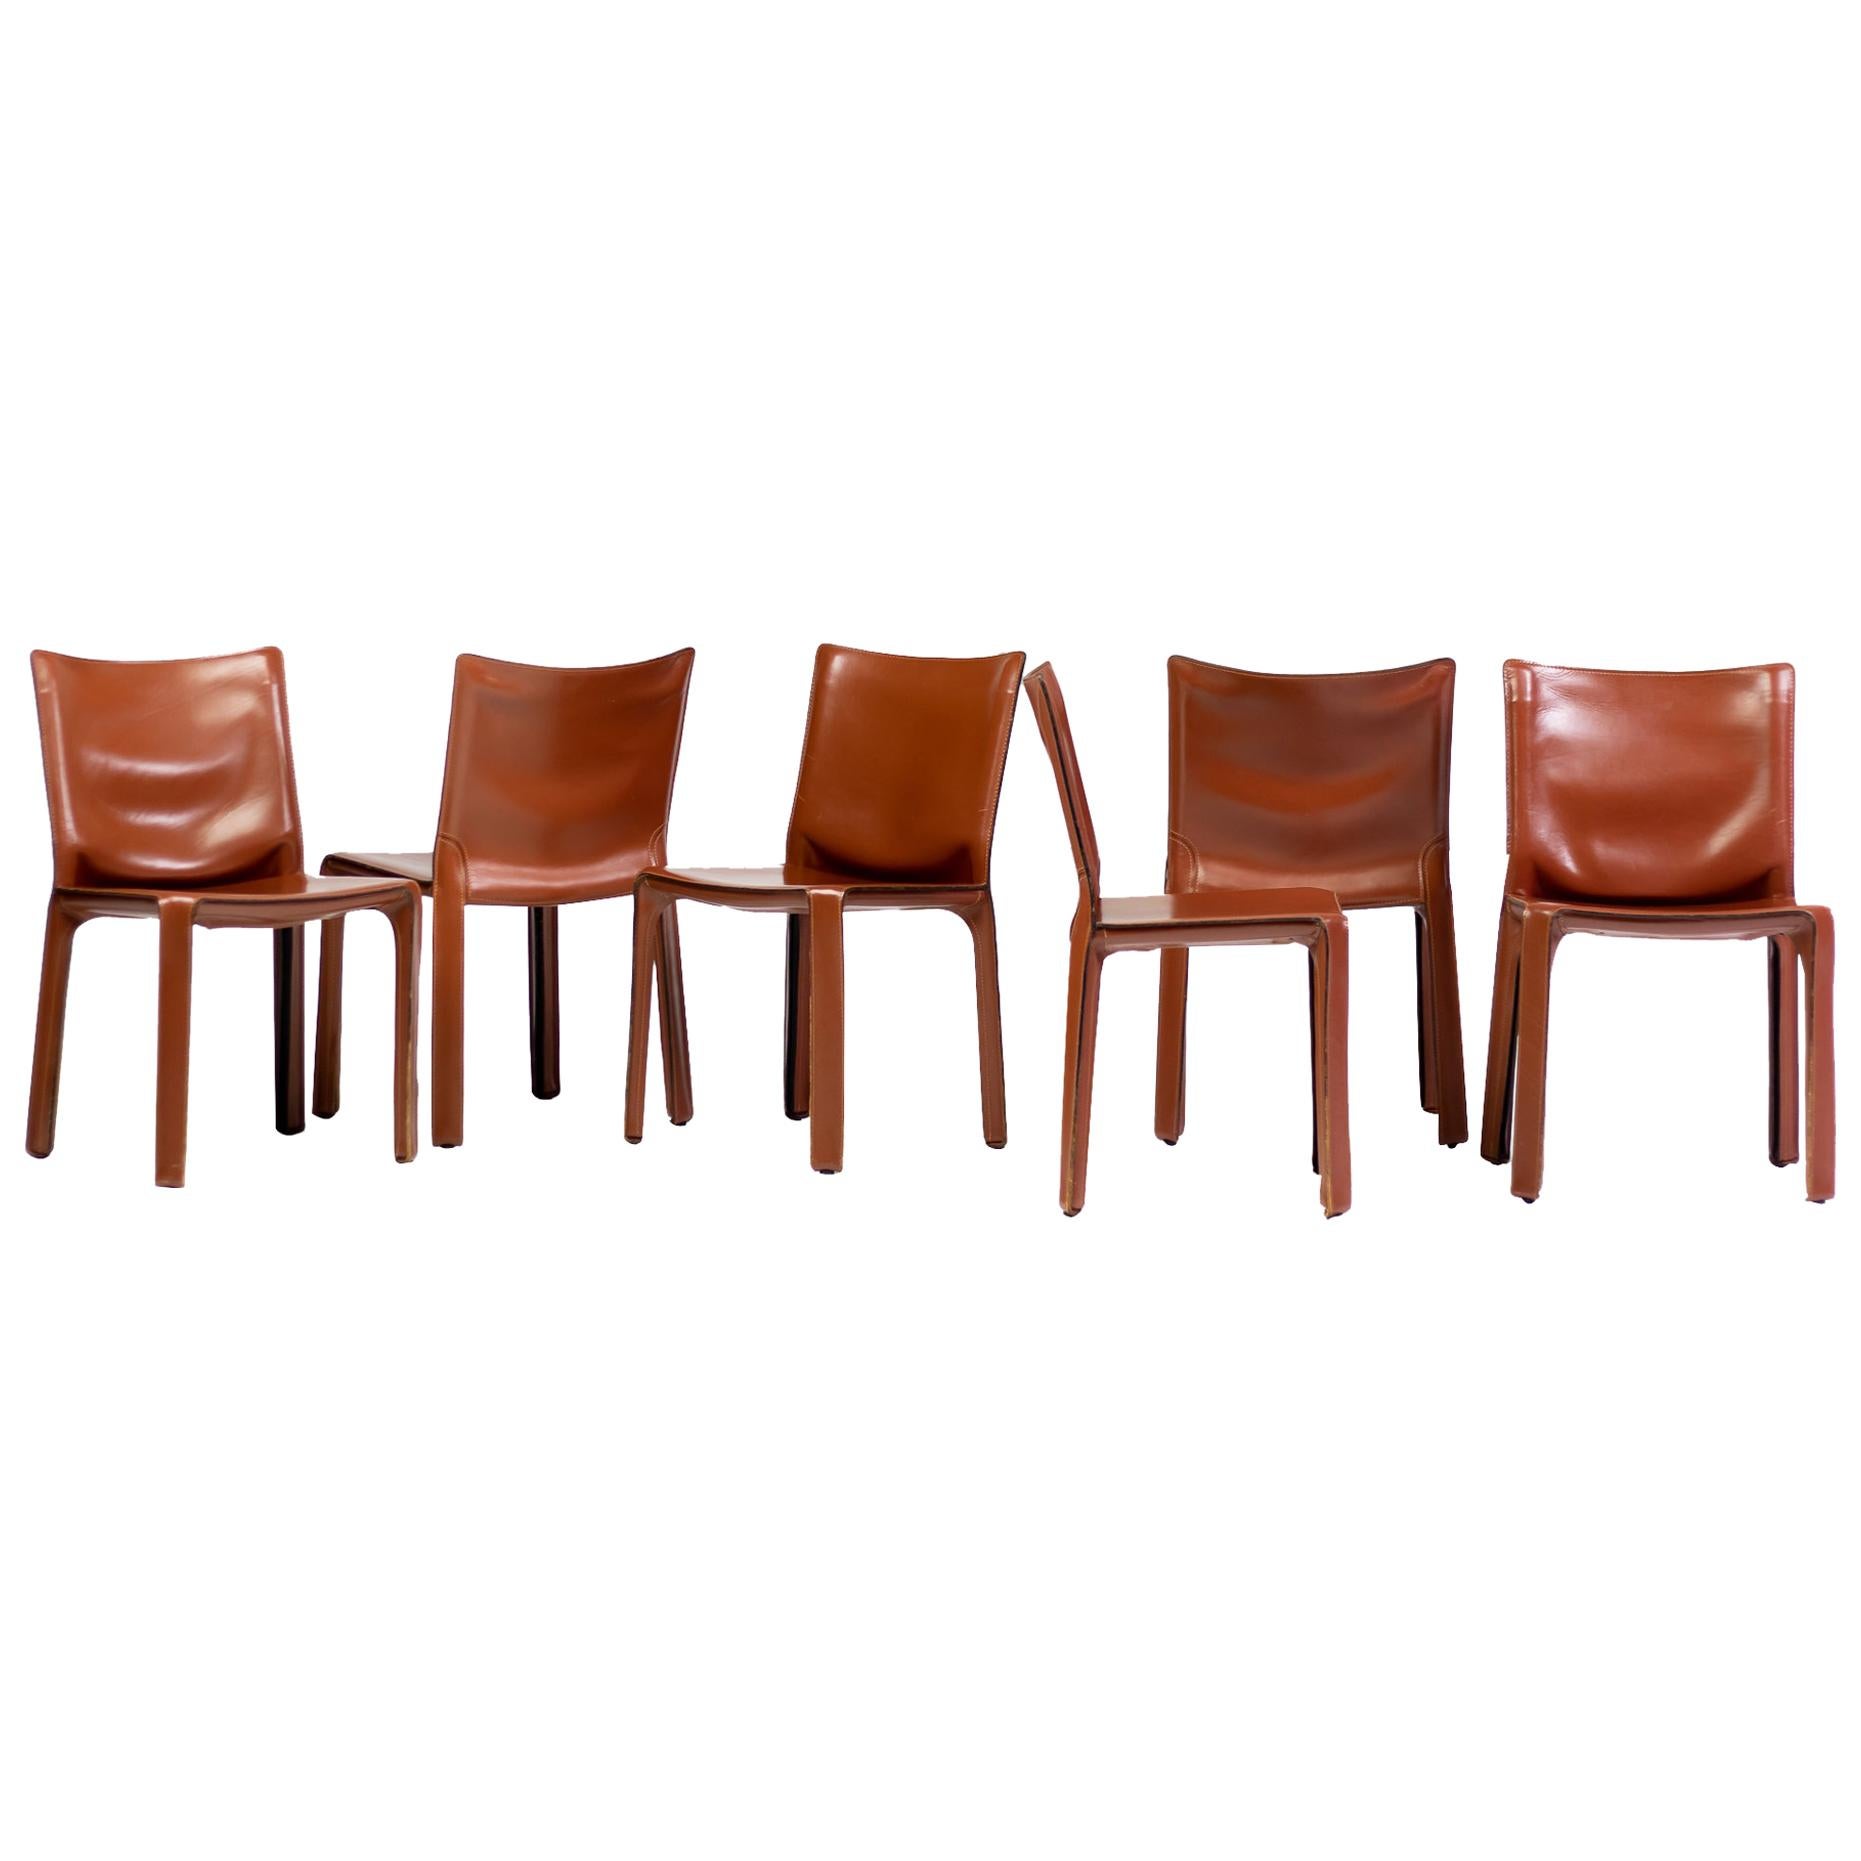 Set of Six Mario Bellini Cab Chairs for Cassina in Cognac Saddle Leather